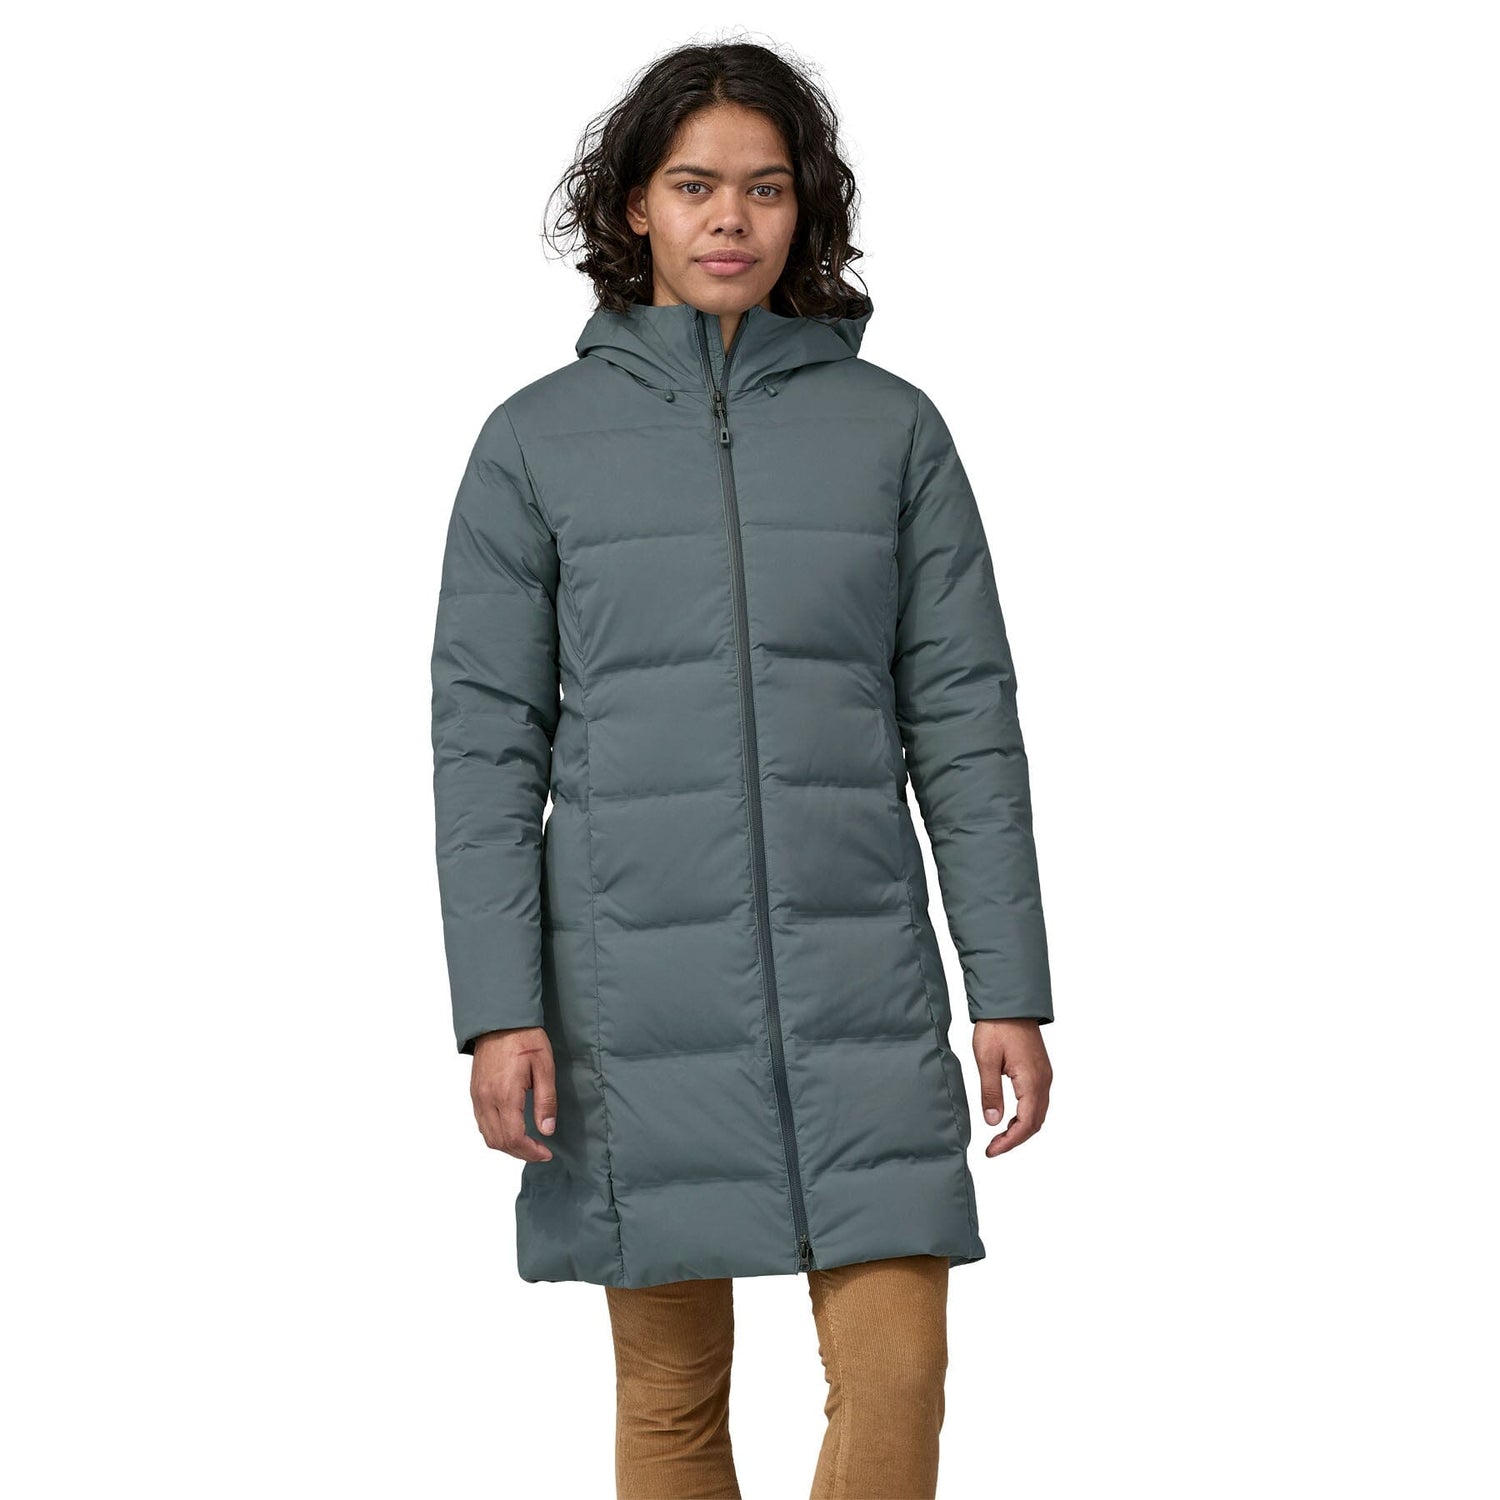 Patagonia W's Jackson Glacier Parka - Recycled Down / Recycled Polyester Nouveau Green Jacket